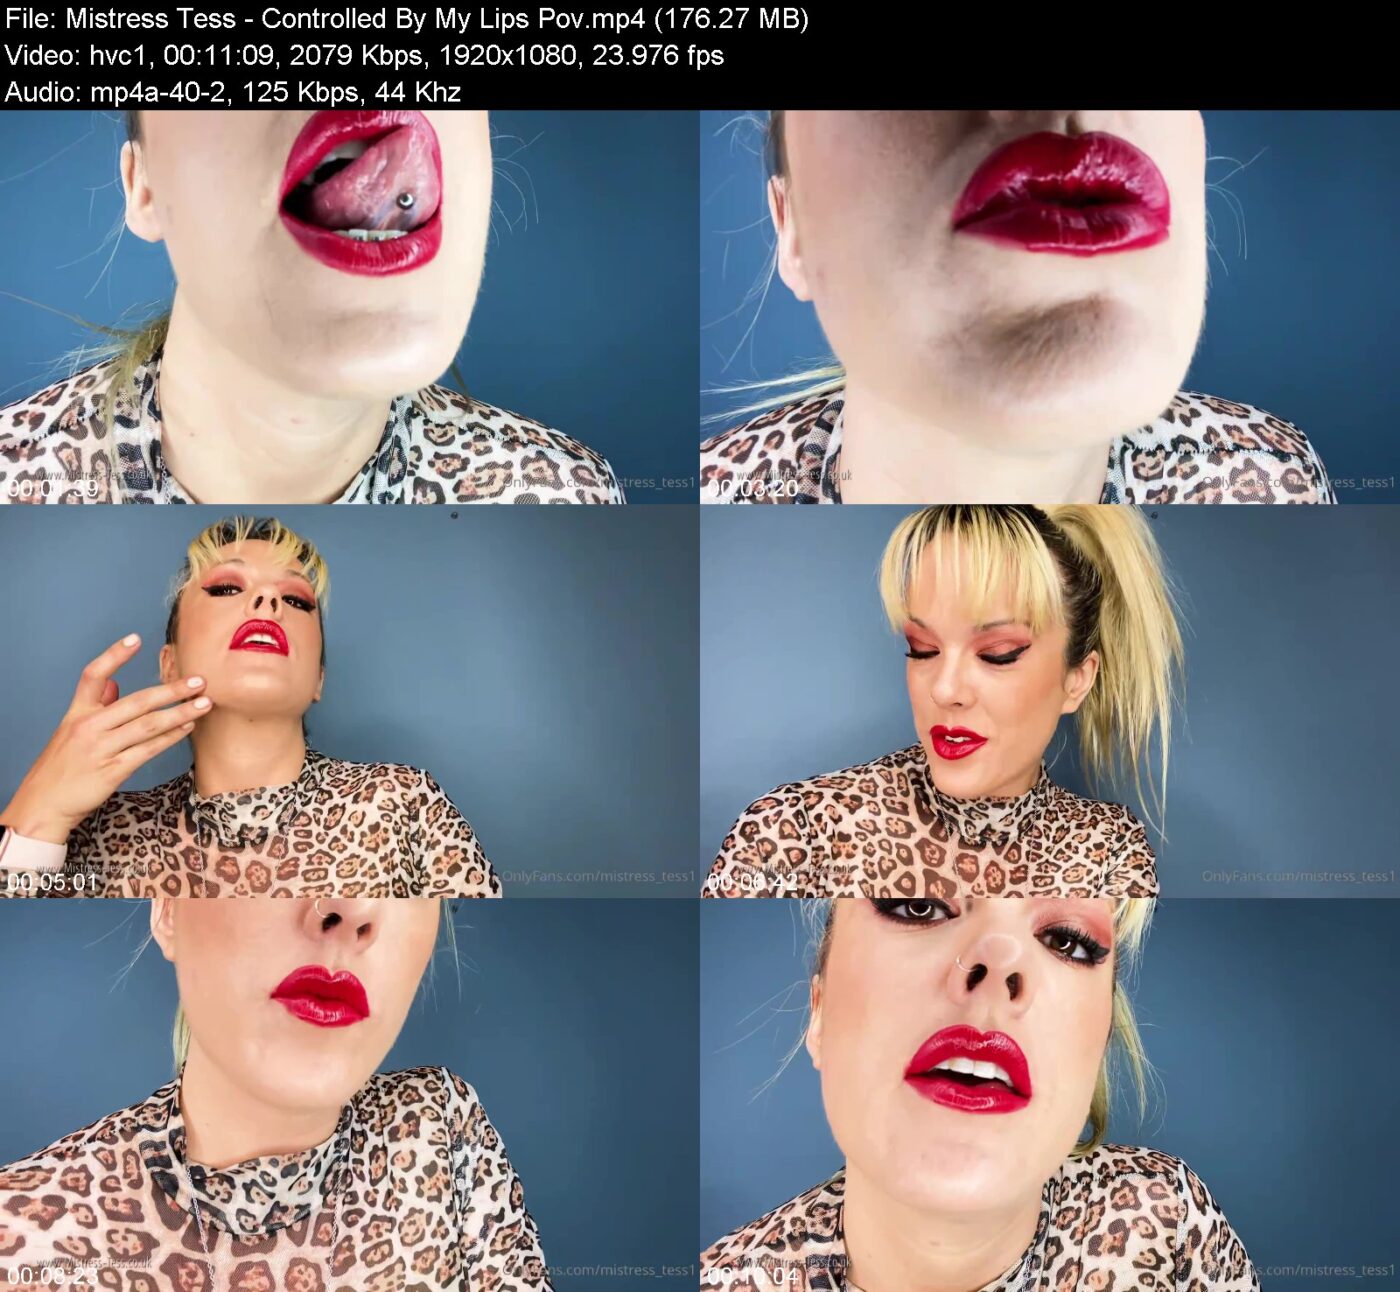 Actress: Mistress Tess. Title and Studio: Controlled By My Lips Pov